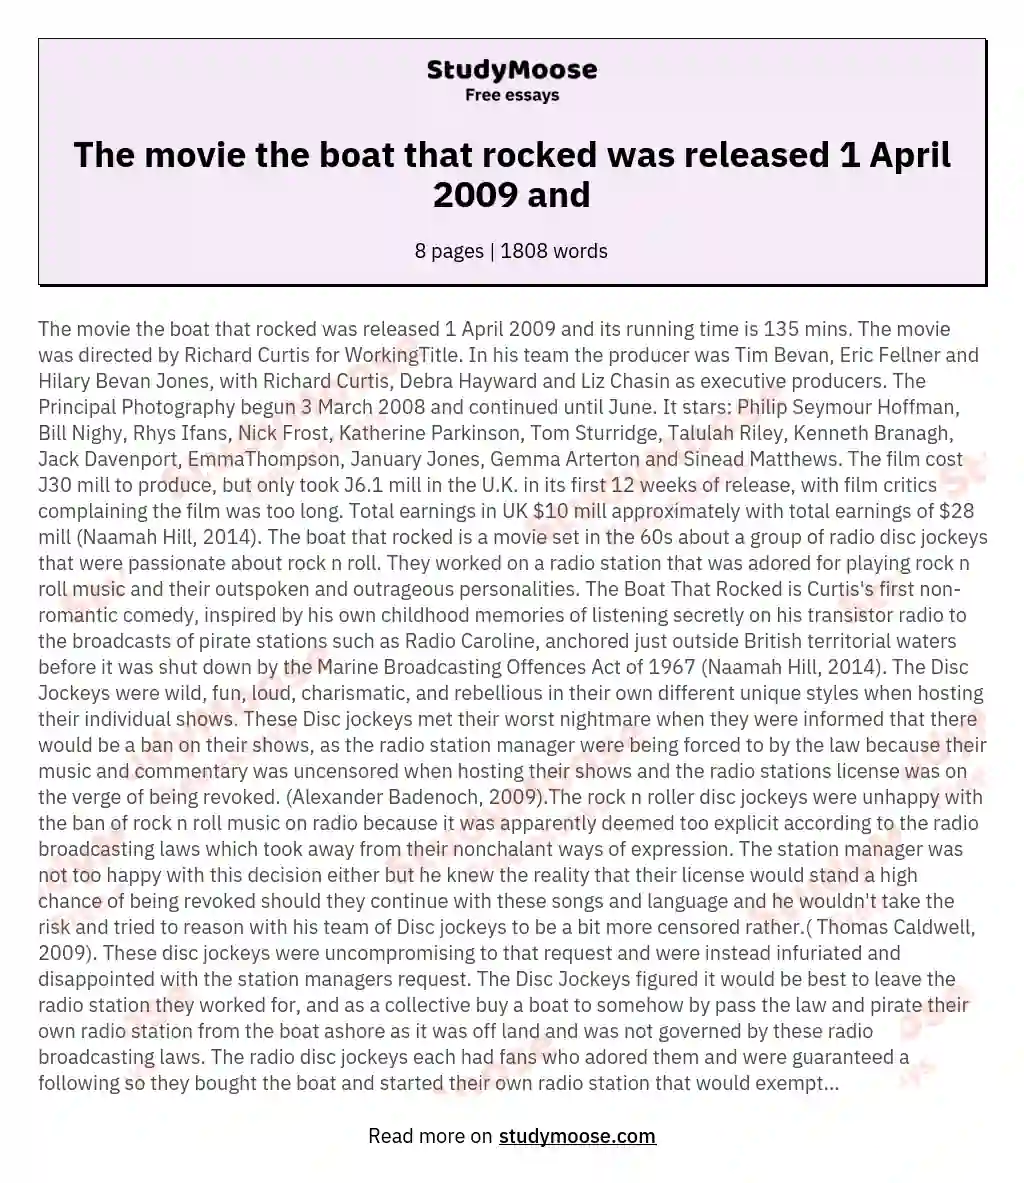 The movie the boat that rocked was released 1 April 2009 and